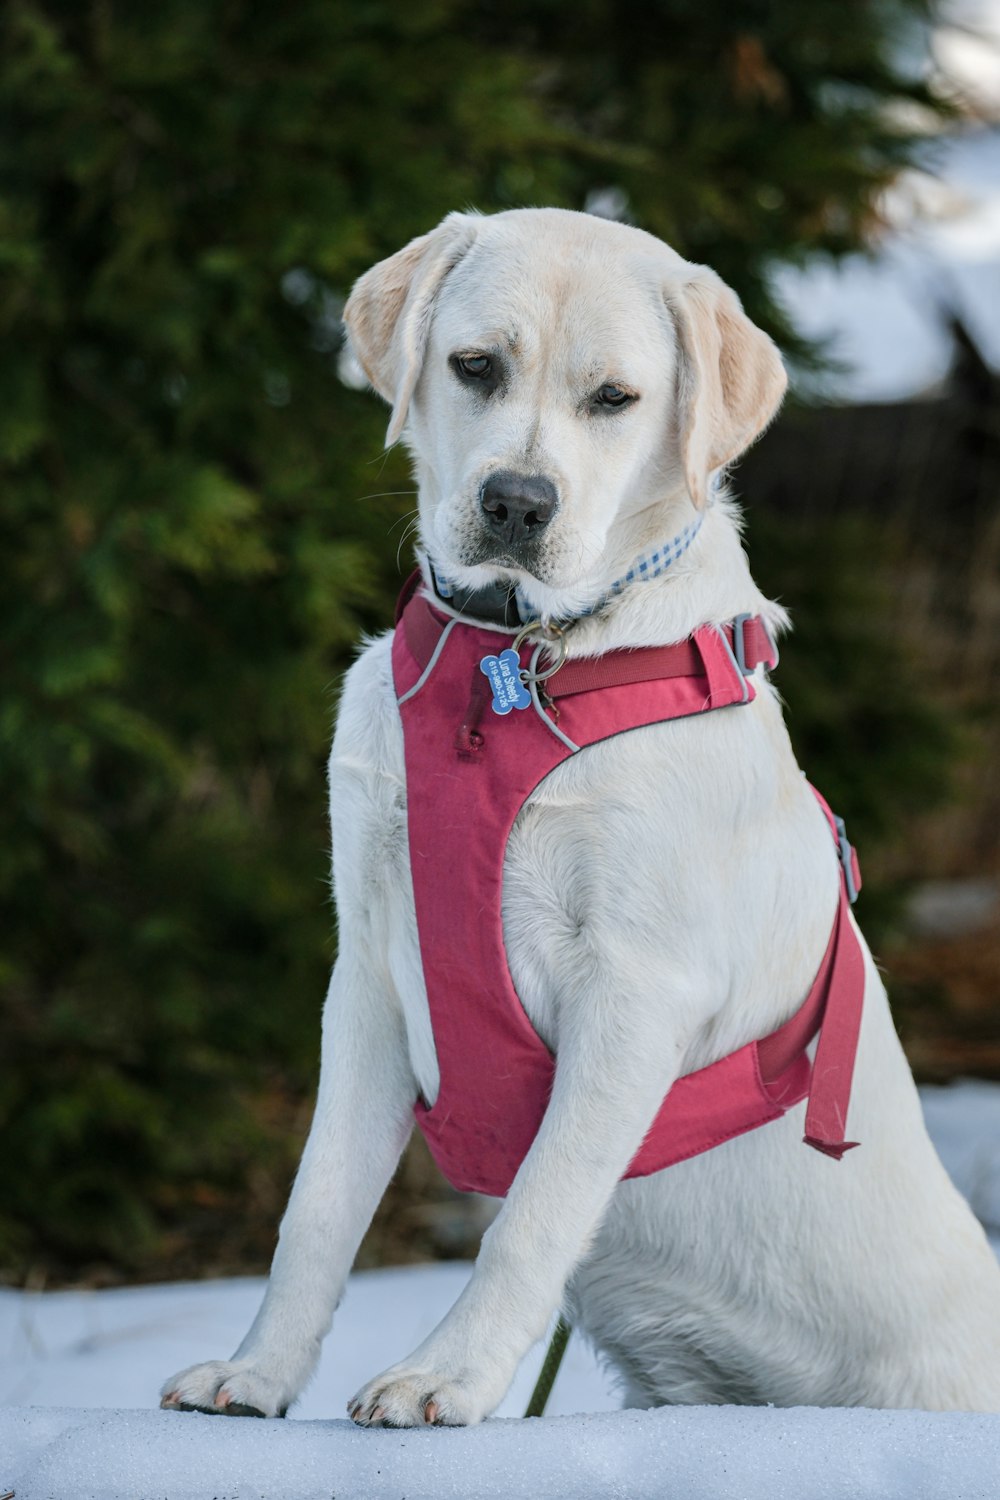 a white dog with a red harness sitting in the snow